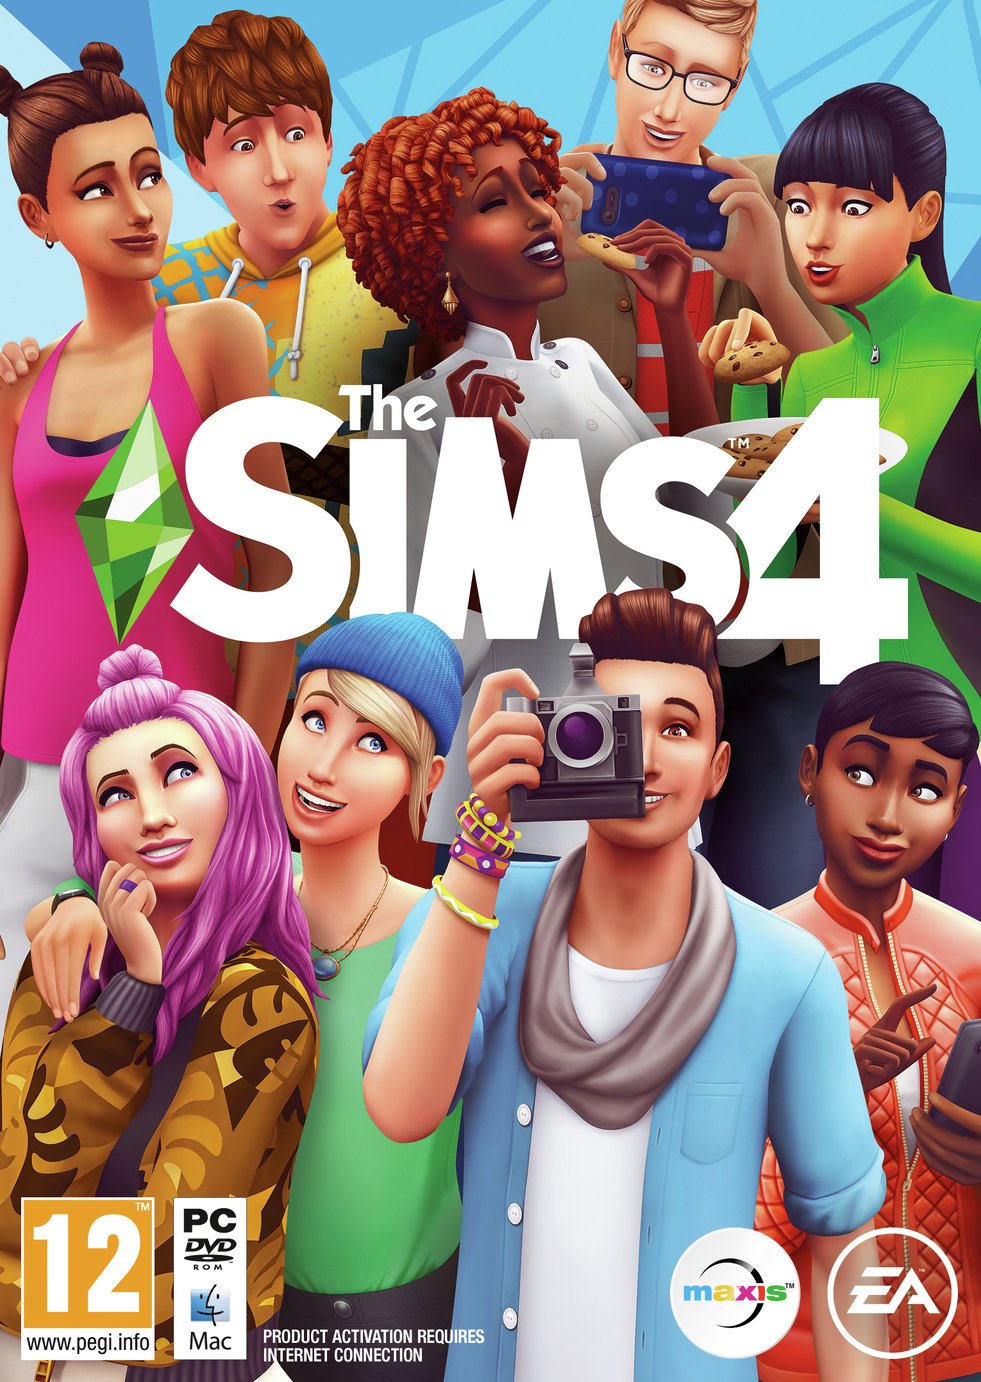 The SIMS 4 PC Game Review